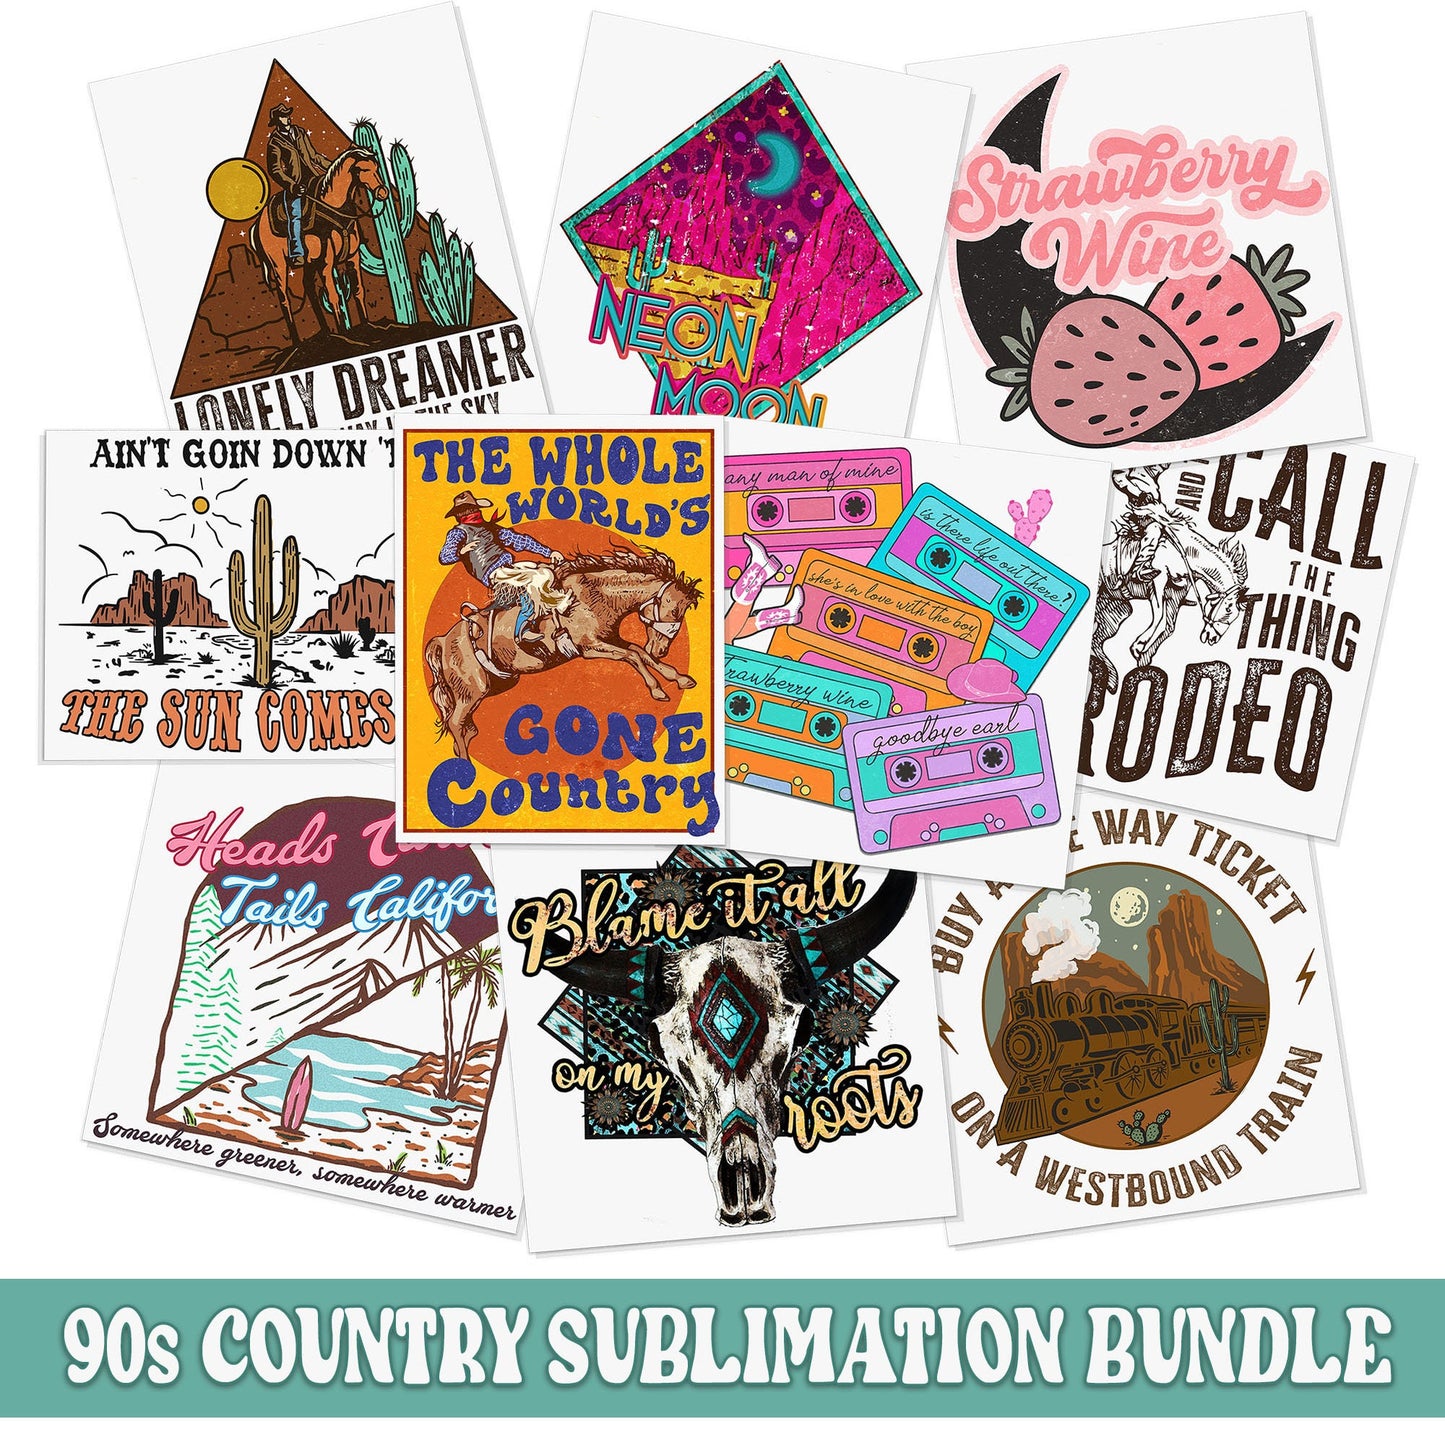 Western 90s Country Music Sublimation Bundle, Ready To Press Sublimation Transfers, Ready To Press, Sublimation Prints, Sublimation Transfer